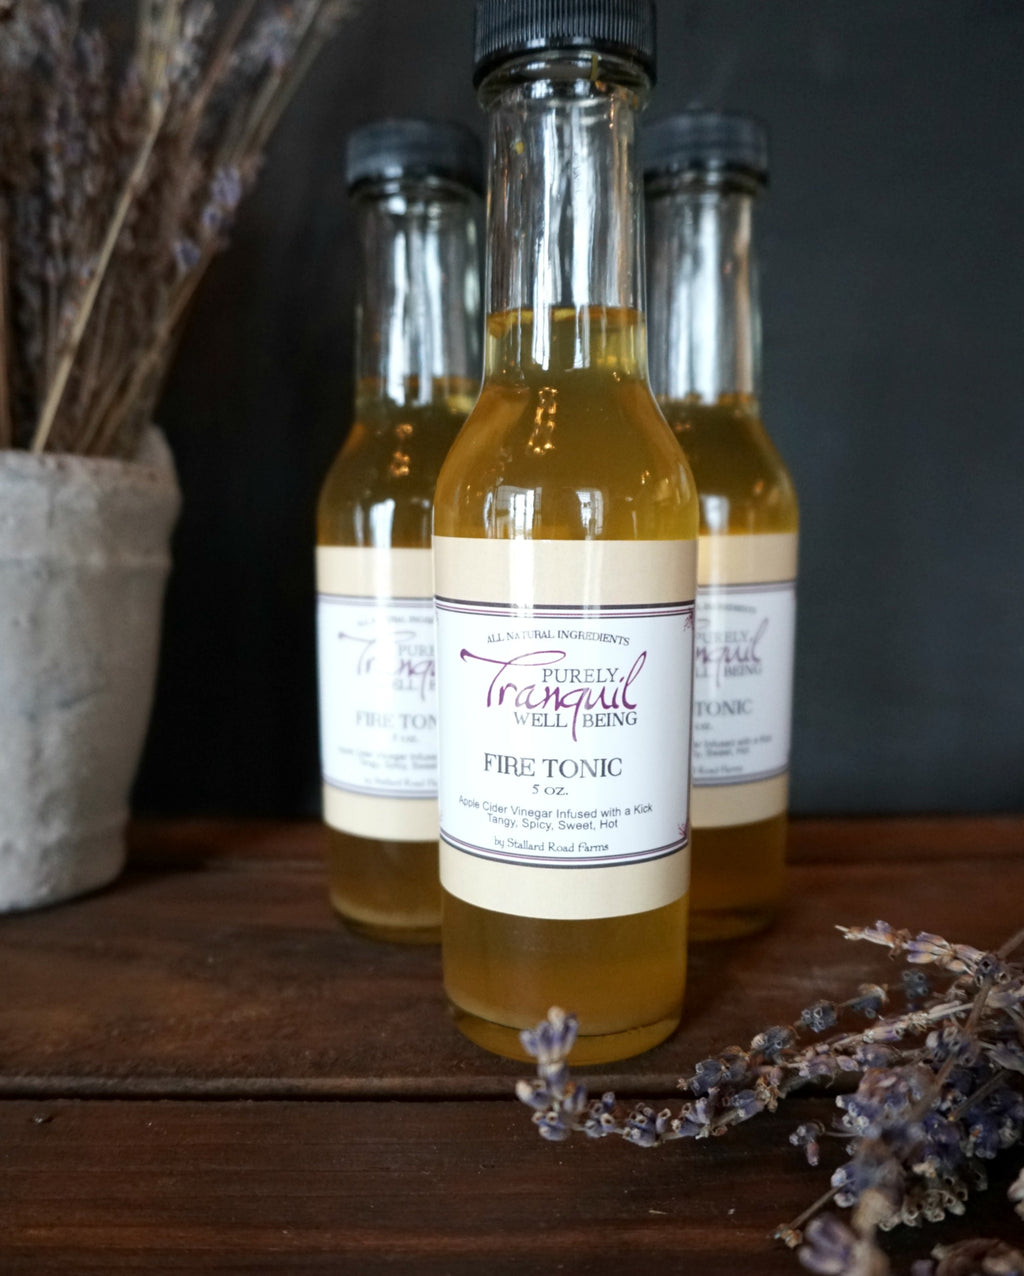 Purely Tranquil Fire Tonic